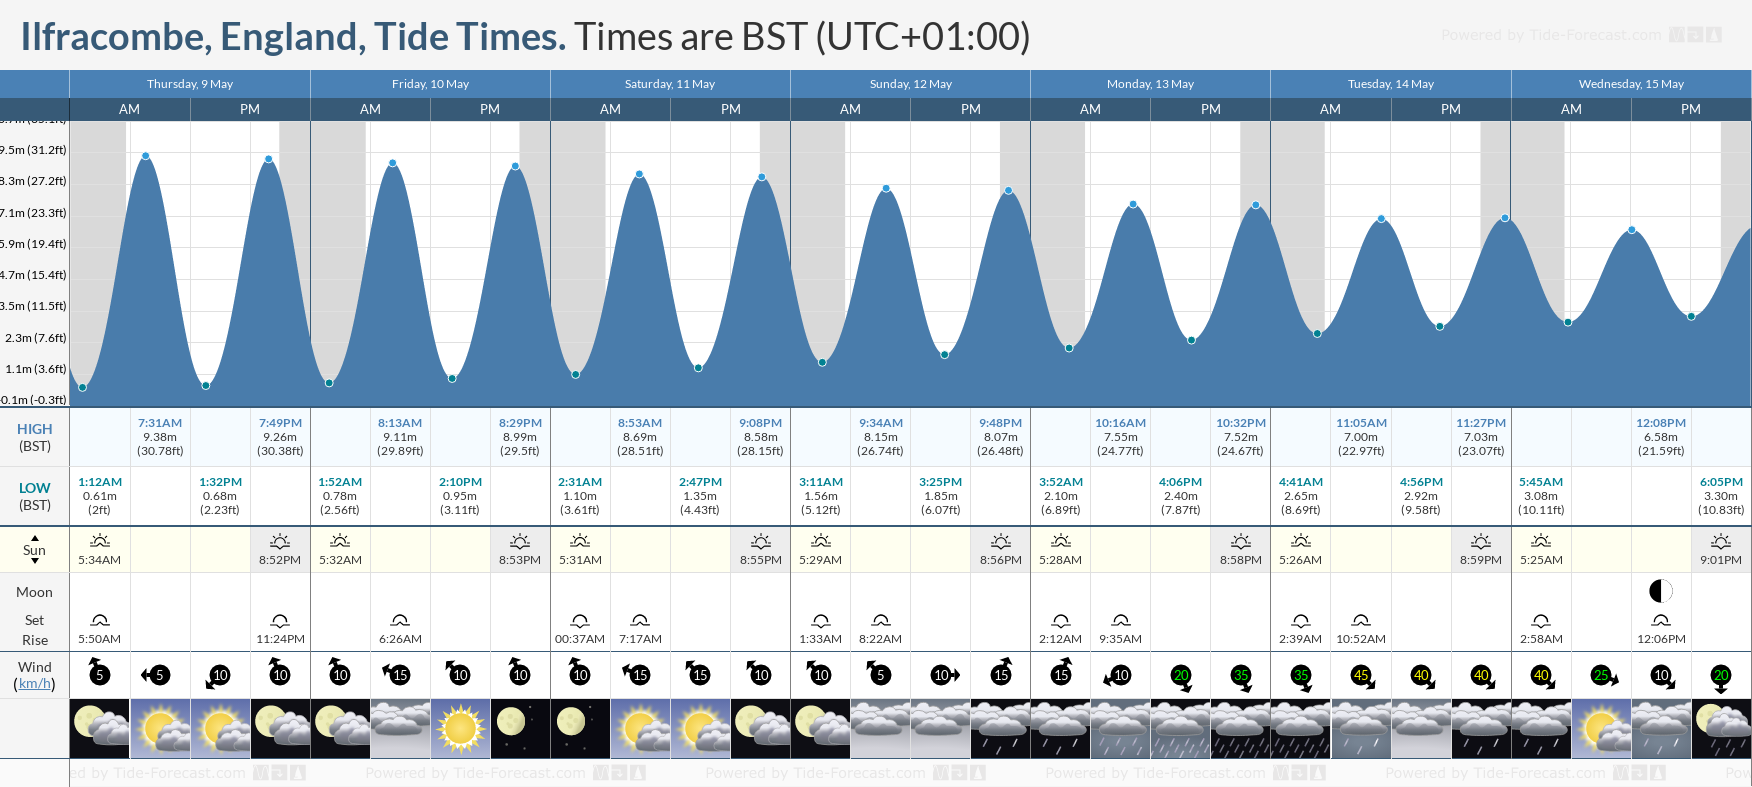 Ilfracombe, England Tide Chart including high and low tide times for the next 7 days